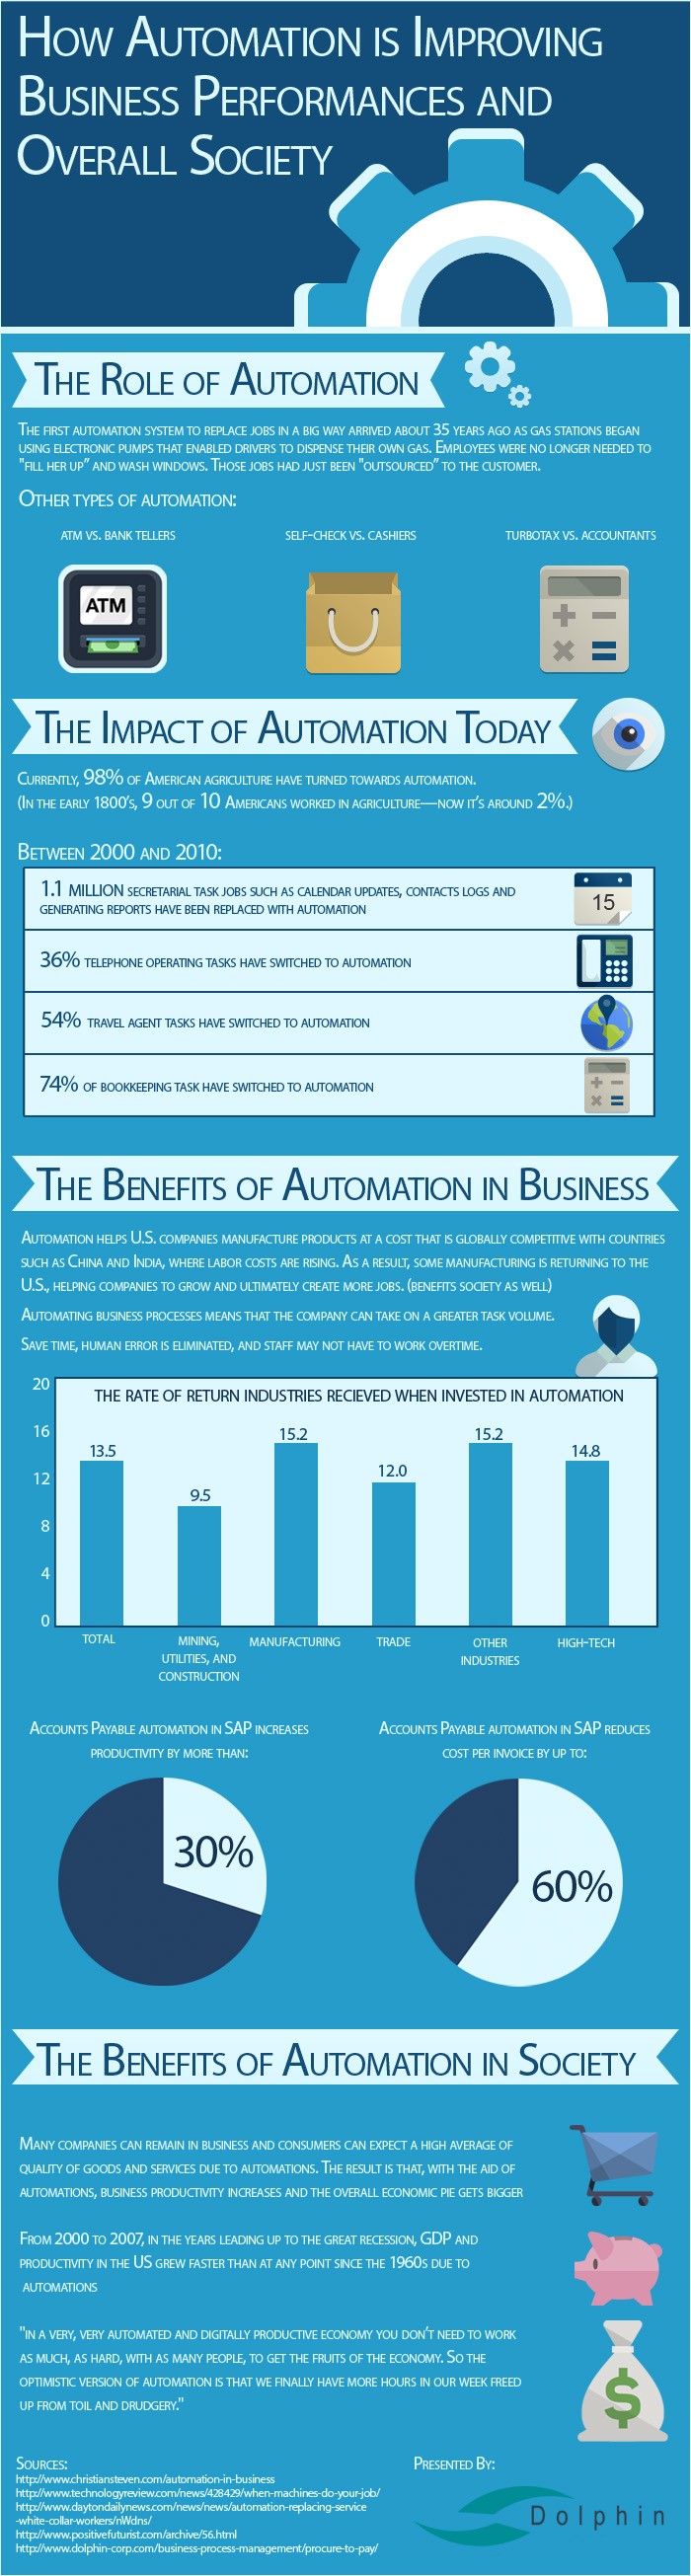 how-automation-improves-business-performance-and-overall-society_52b88fa793379_w700